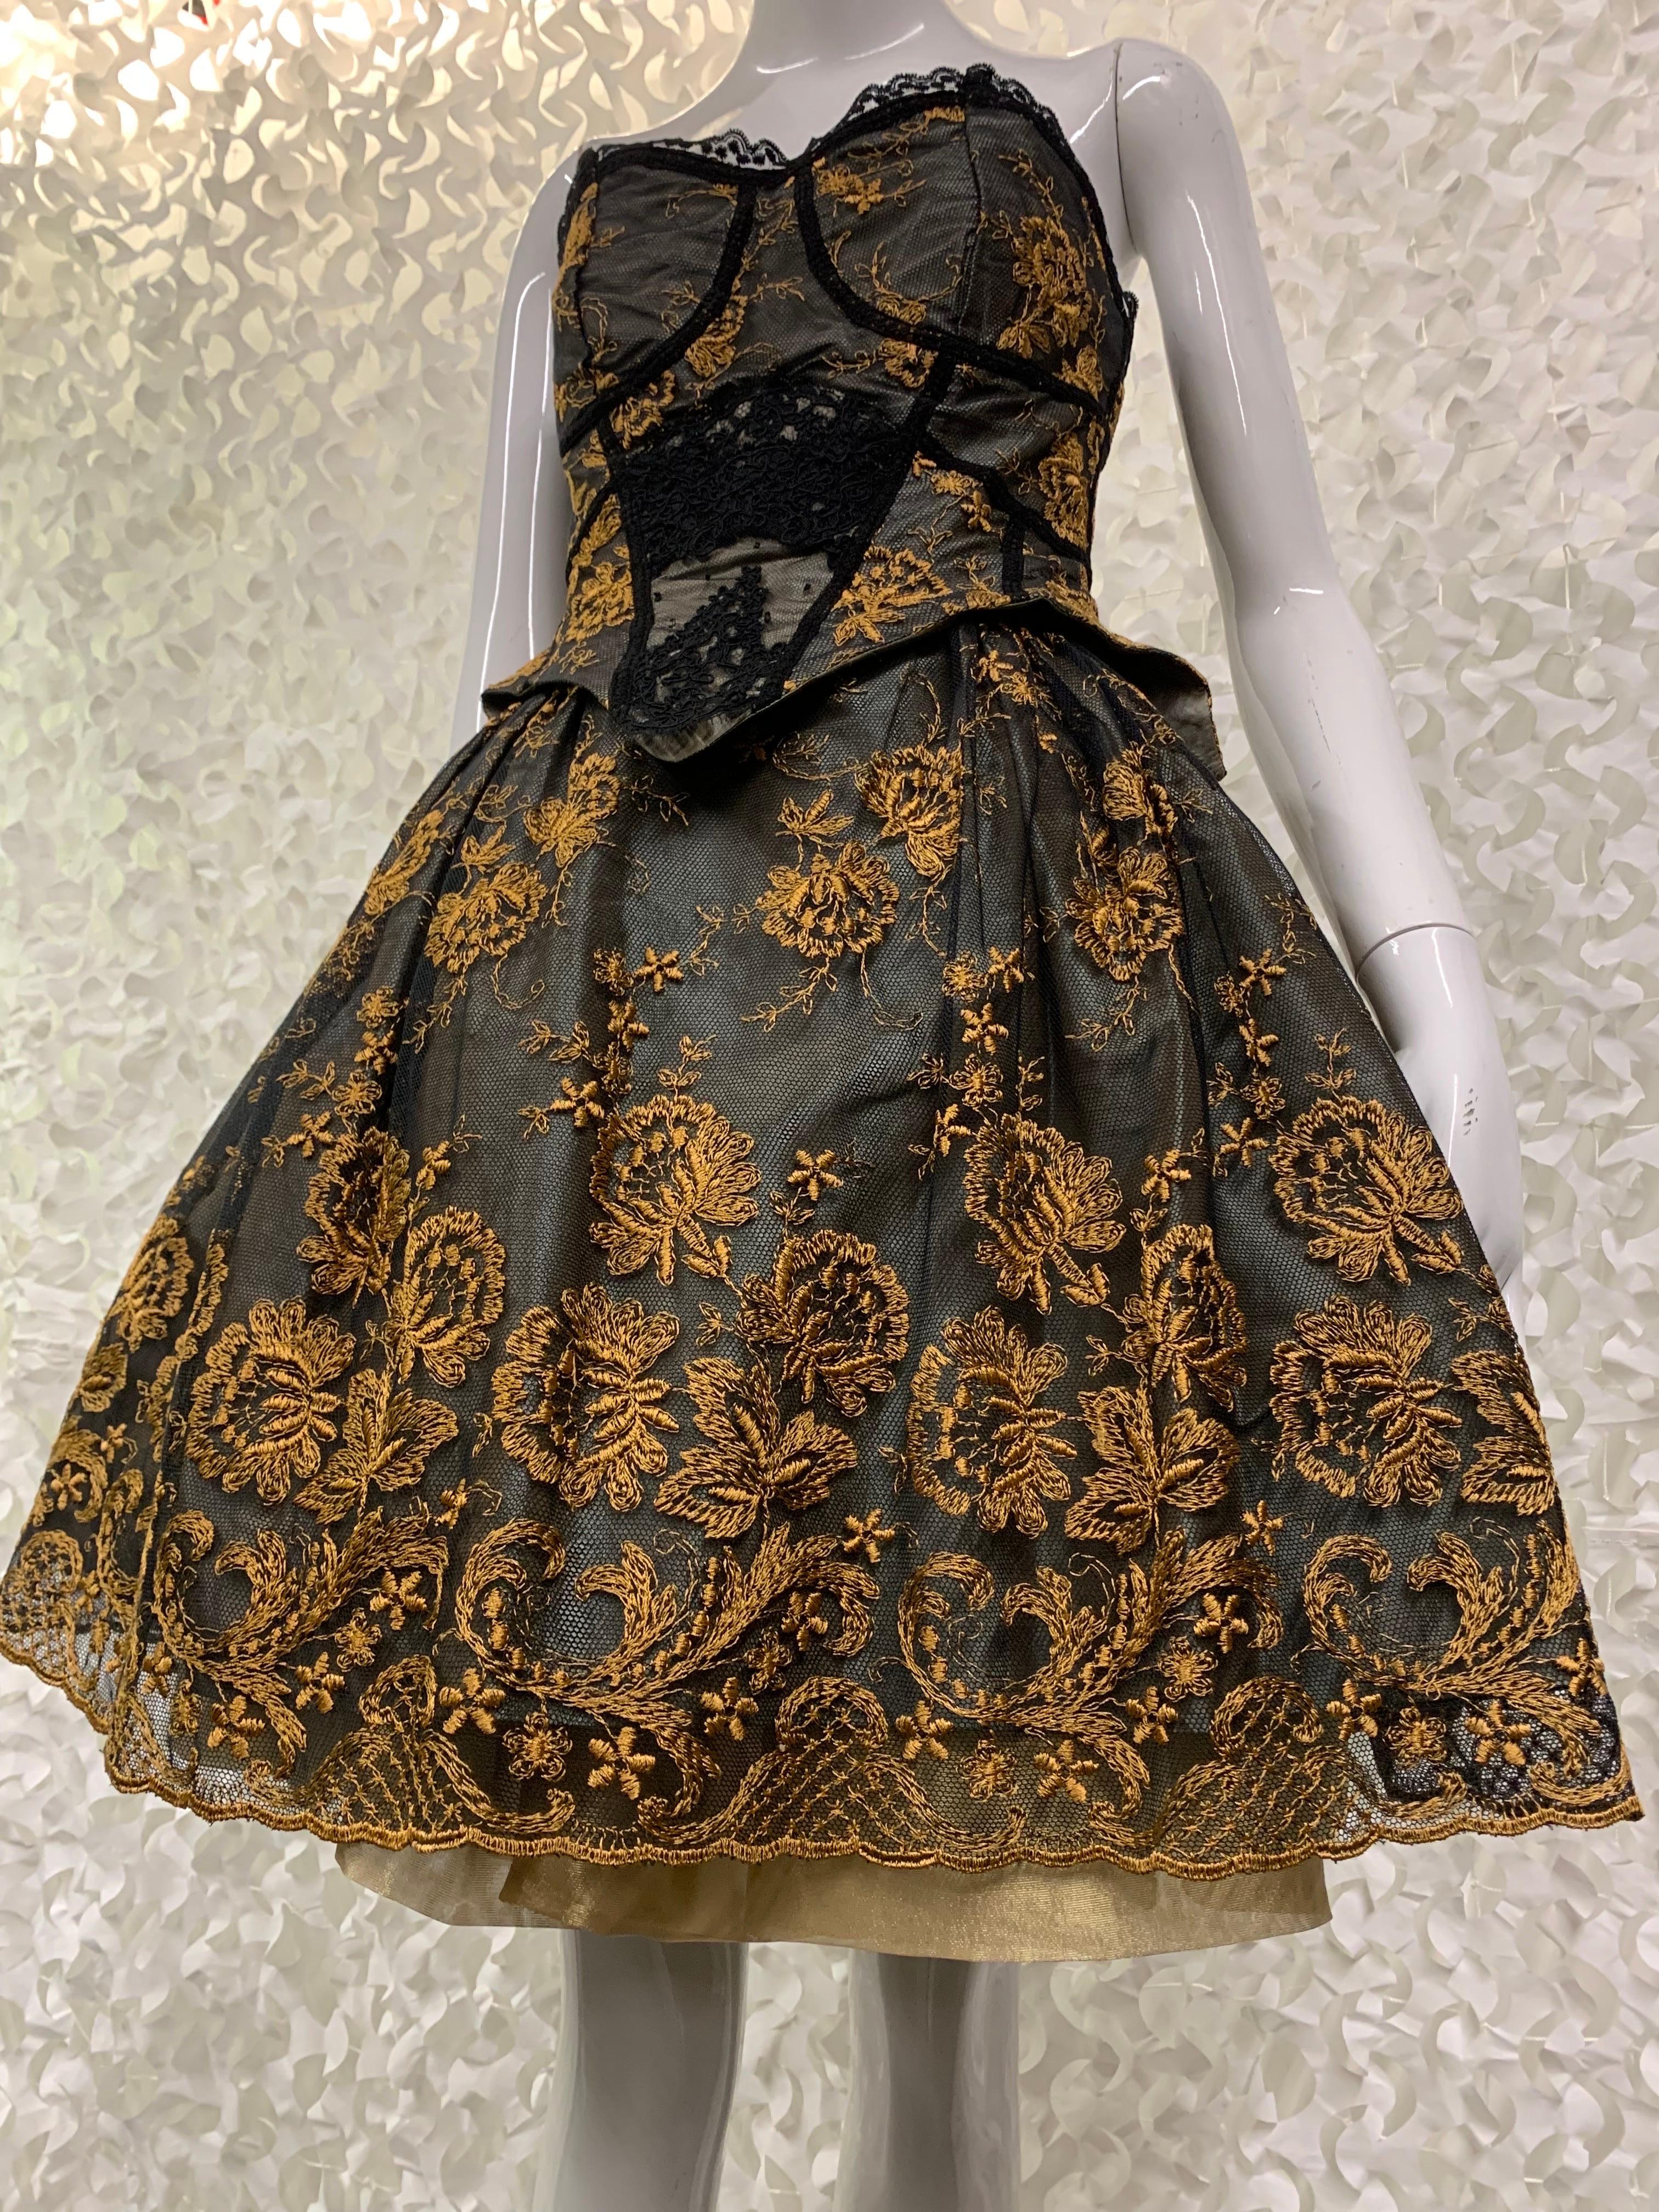 1990s Christian LaCroix Strapless Merry Widow Dress w Pouf Skirt in Black Lace For Sale 4